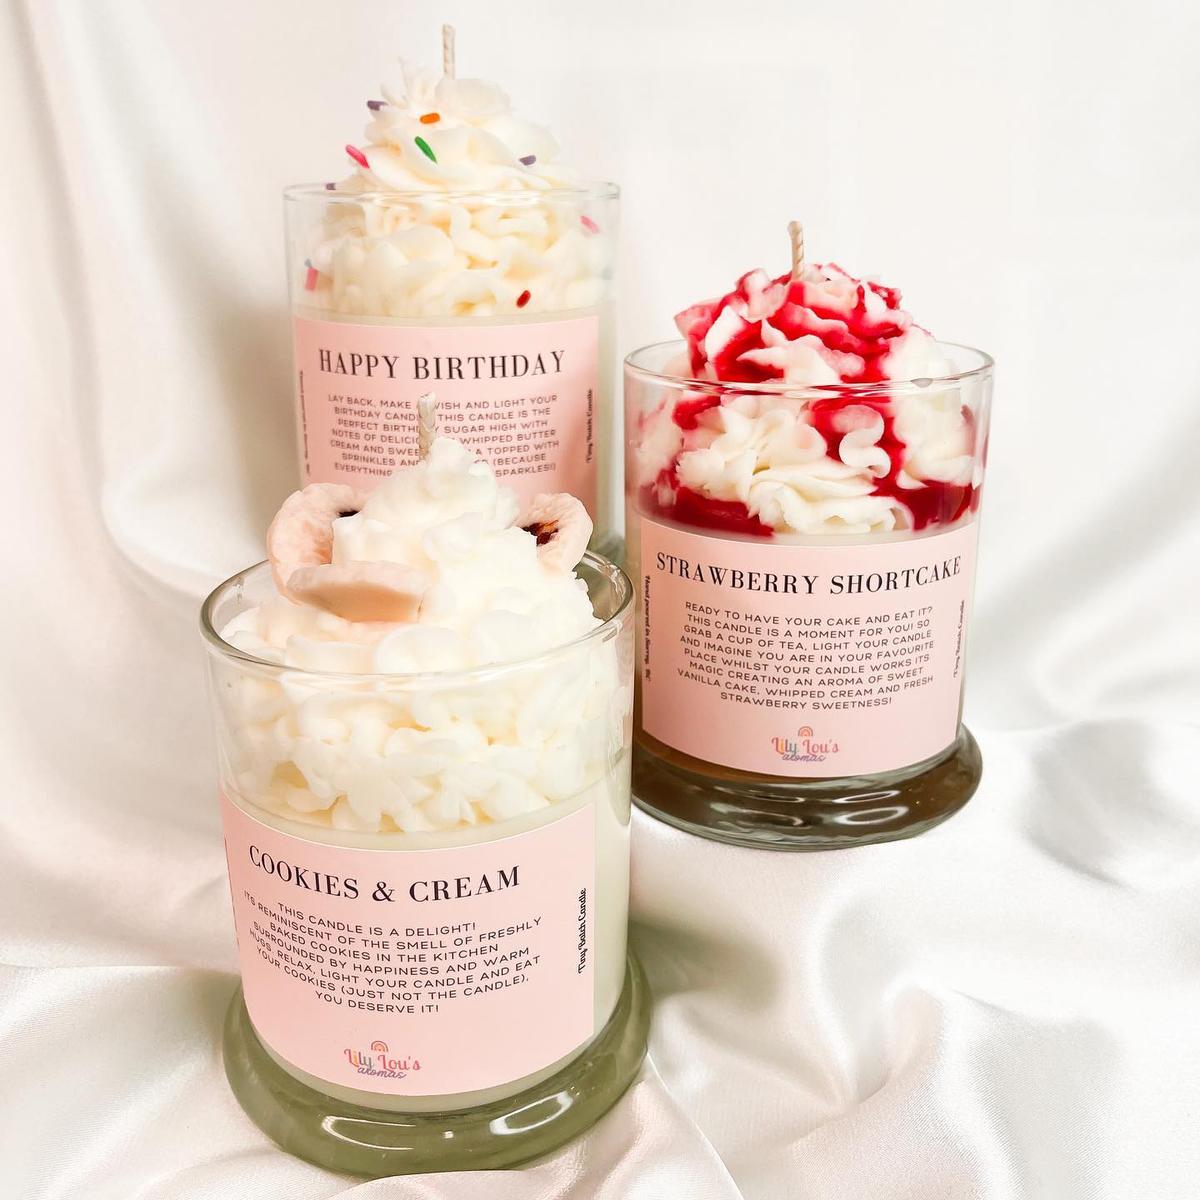 Some of Lily's "whipped candles." (Courtesy of <a href="https://www.instagram.com/lilylousaromas/">Lily Lou’s Aromas</a>)